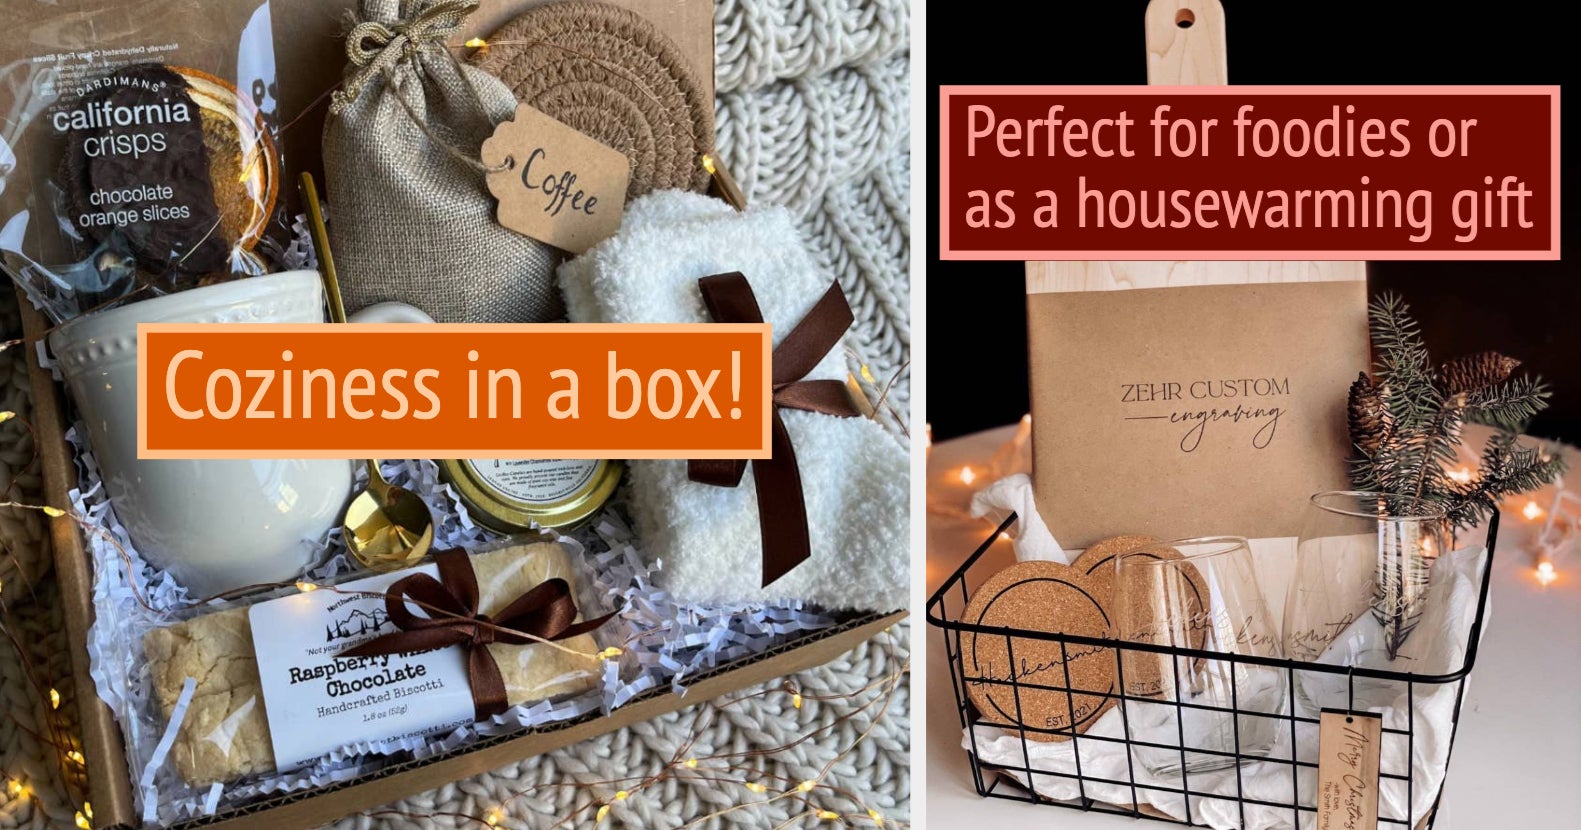 A perfect gift for newlyweds or any couple. (Housewarming gift too!) A cozy  morning gift basket idea.